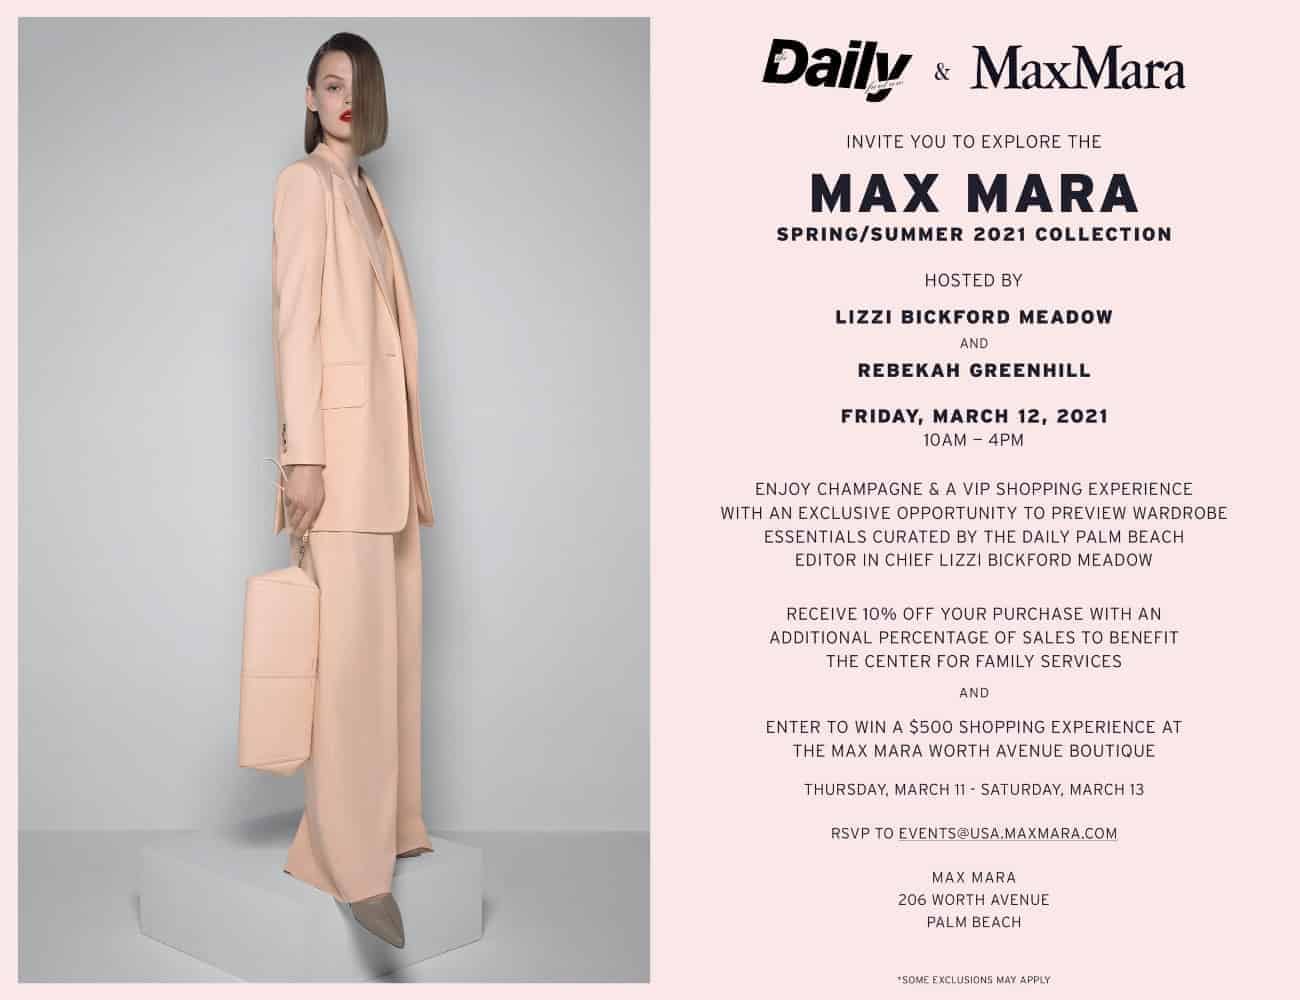 Join The Daily And Max Mara In Palm Beach For A VIP In-store Event